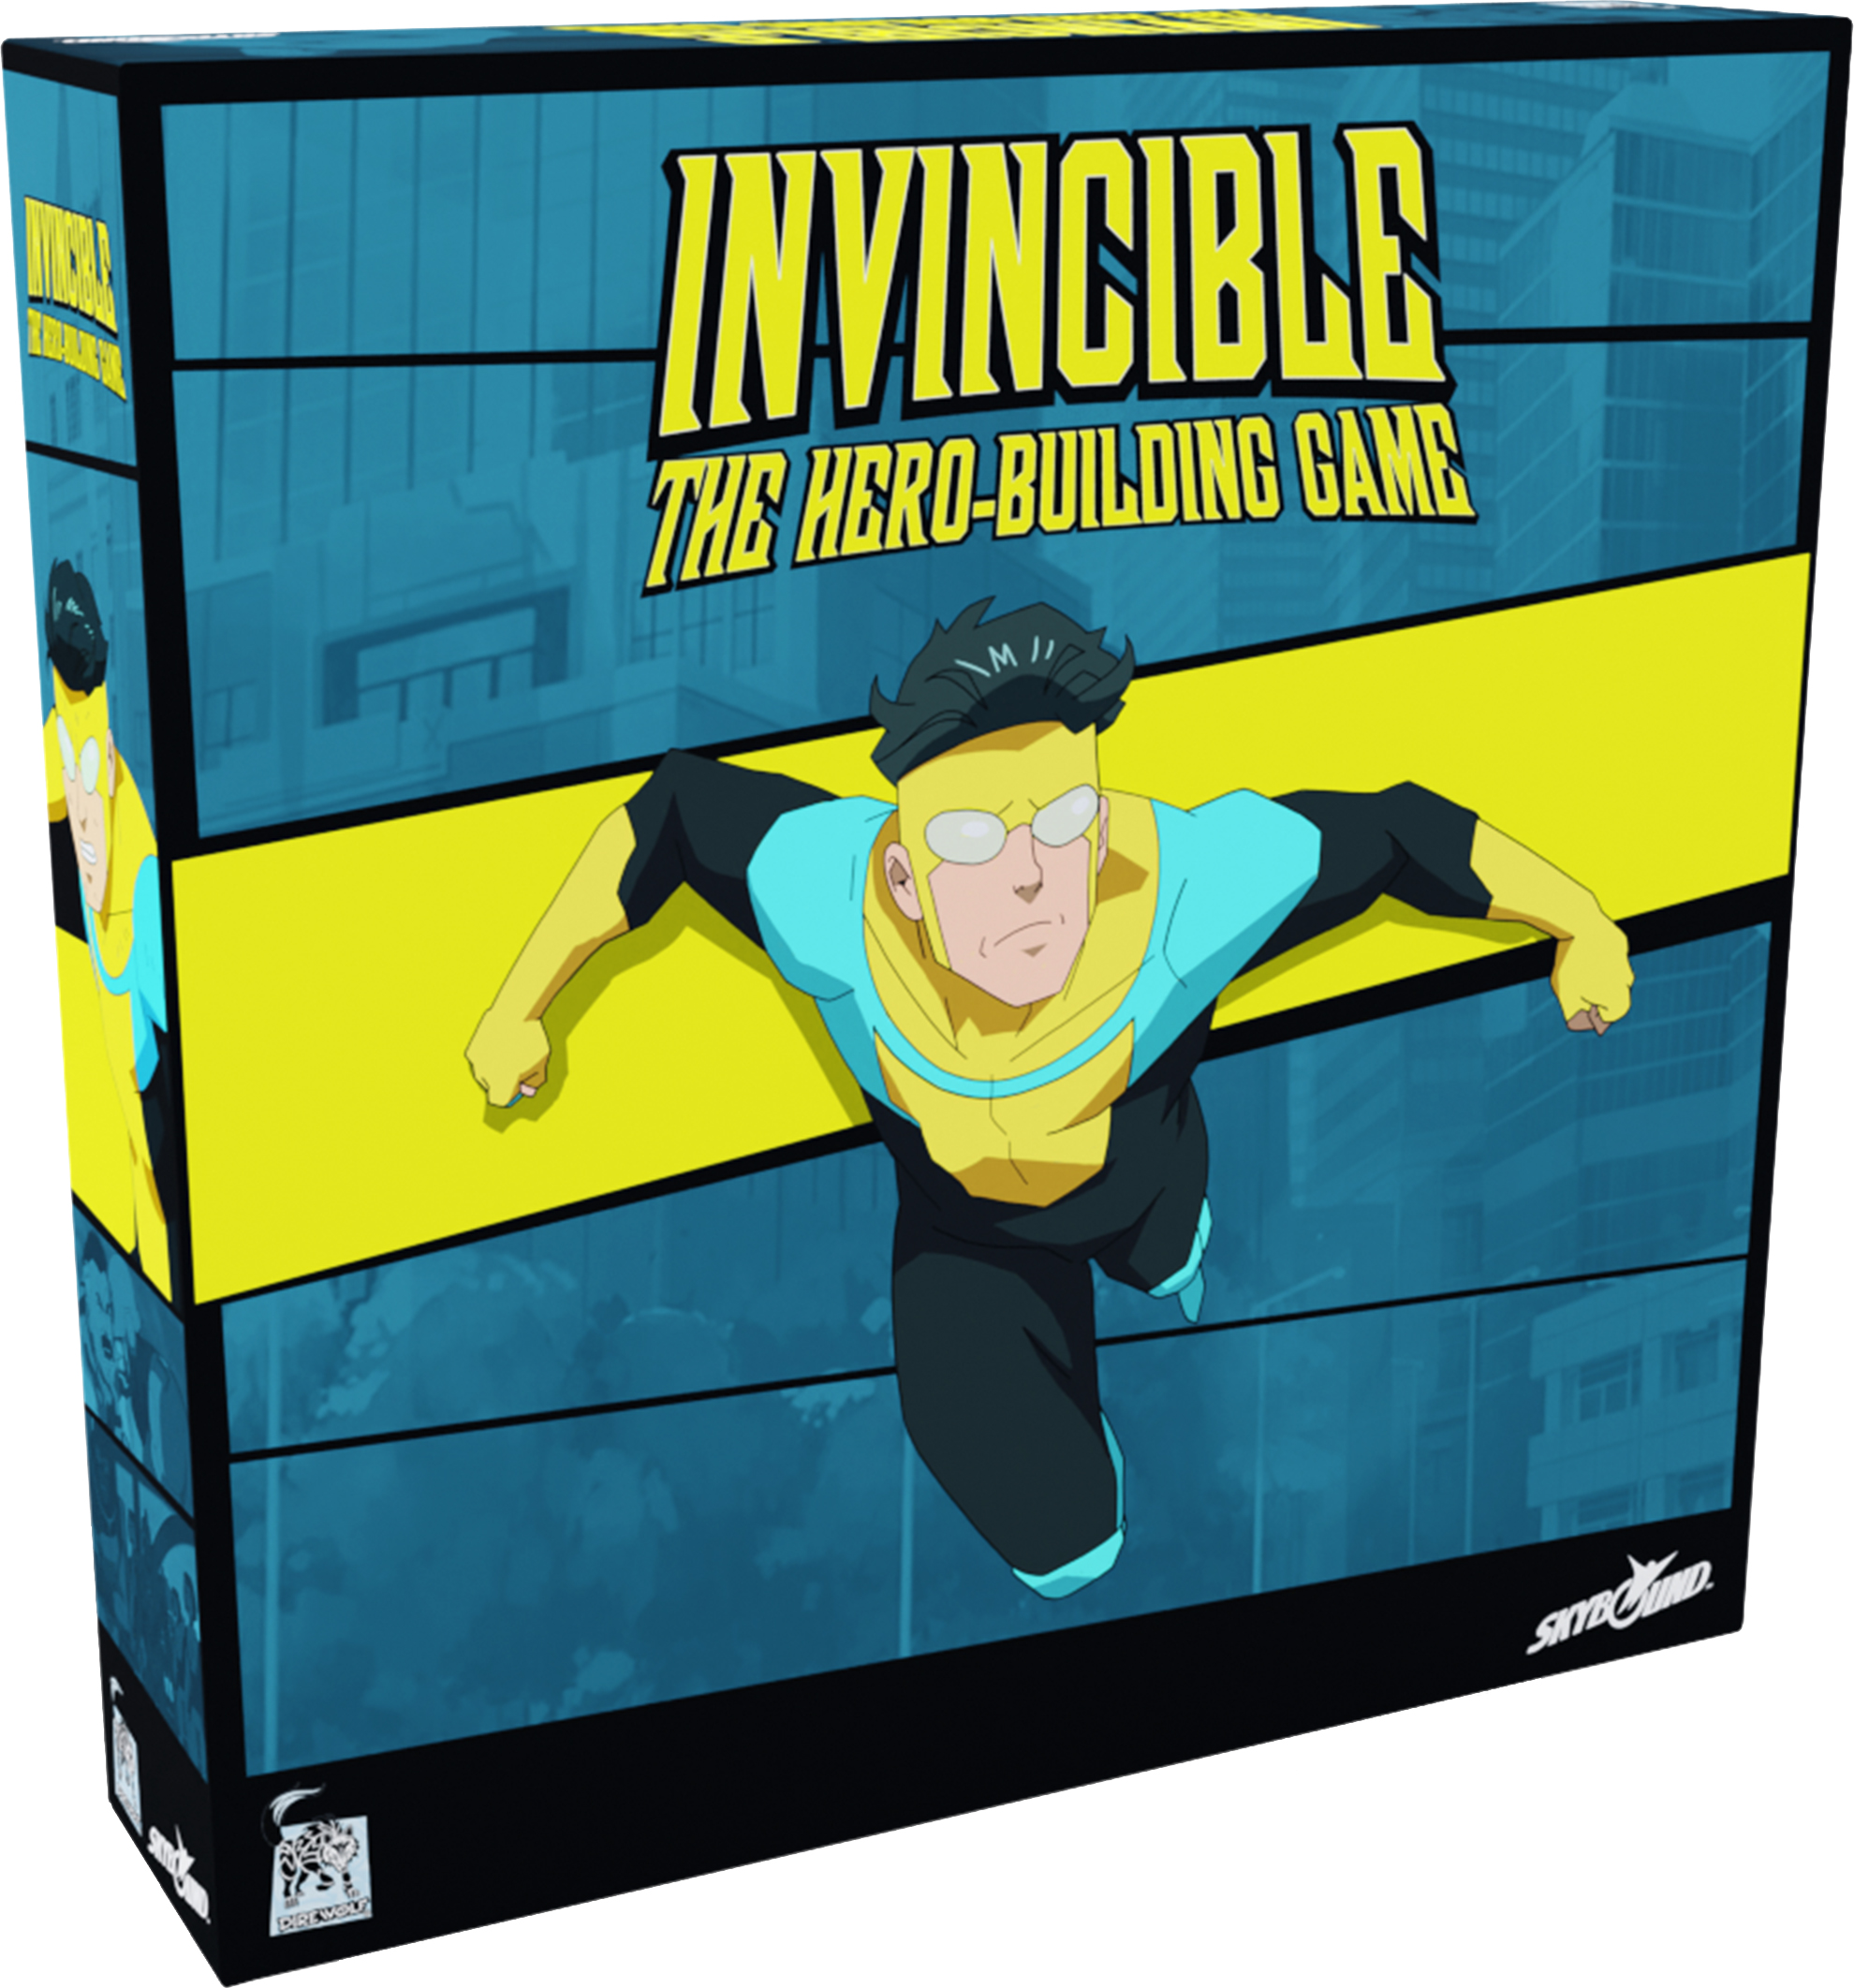 GTM #289 - Invincible: The Hero-Building Game